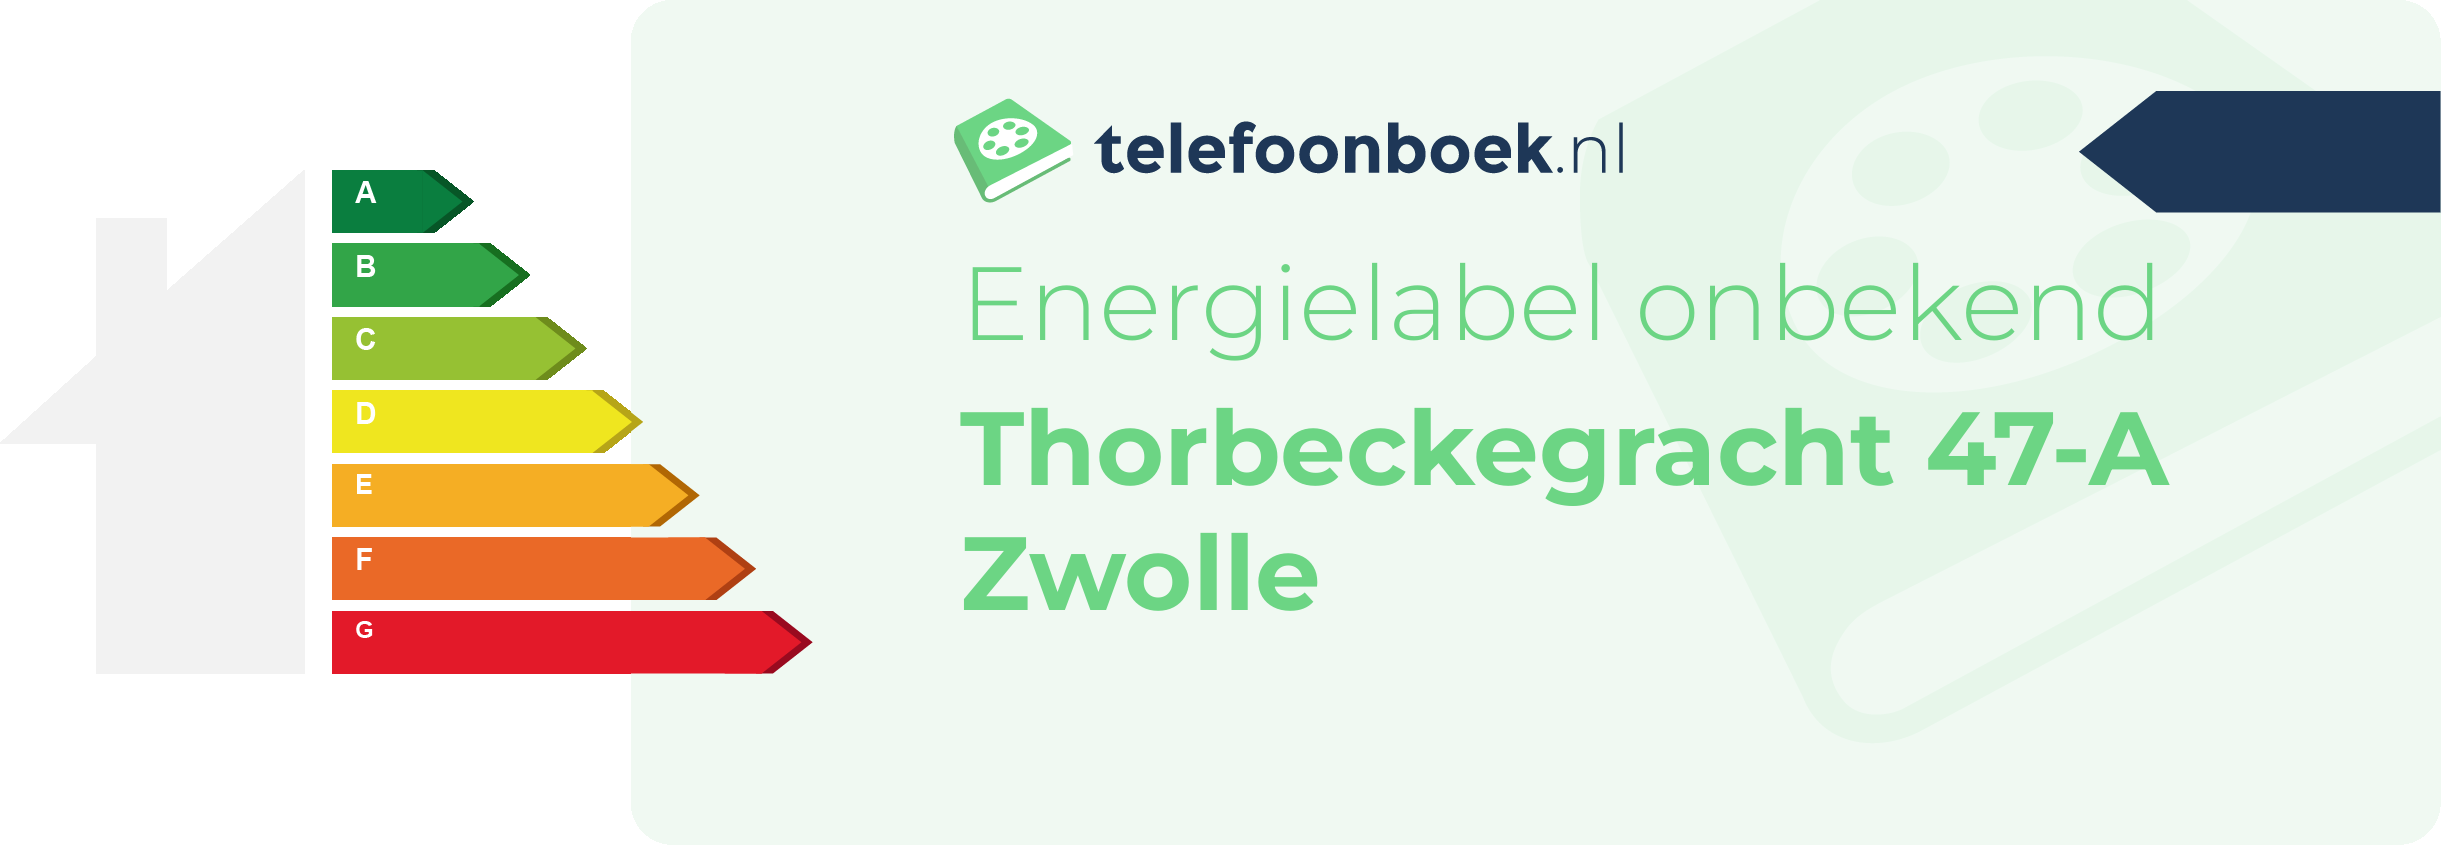 Energielabel Thorbeckegracht 47-A Zwolle